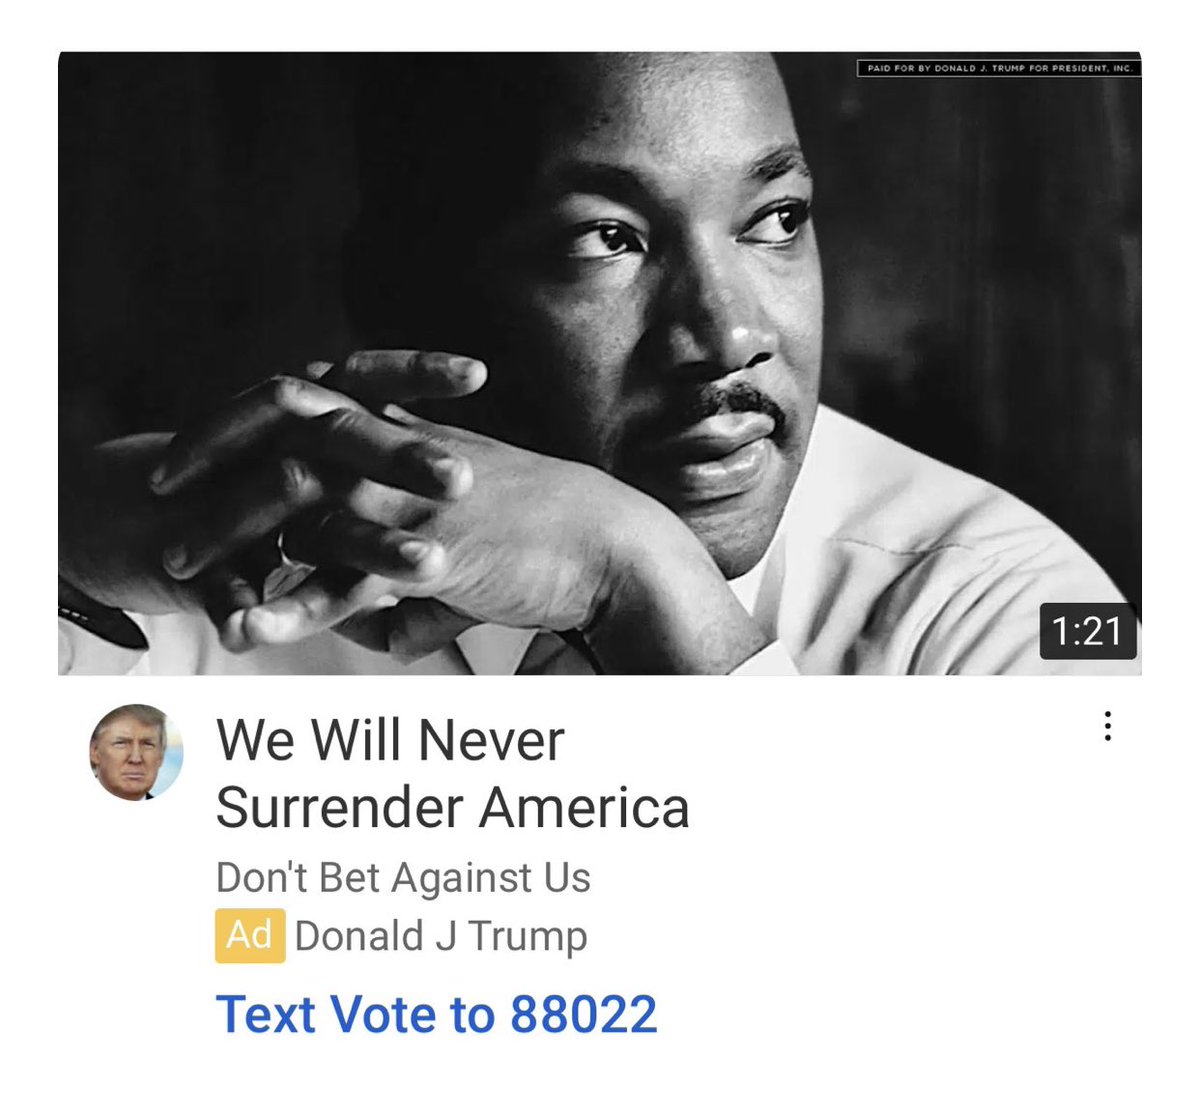 I find President Trump’s use of my father’s image in his political ad beyond insulting and not reflective of  #MLK’s commitment to creating the  #BelovedCommunity. My father should not be used in ways strongly misaligned with his vision and values,  @realDonaldTrump. (1/3)